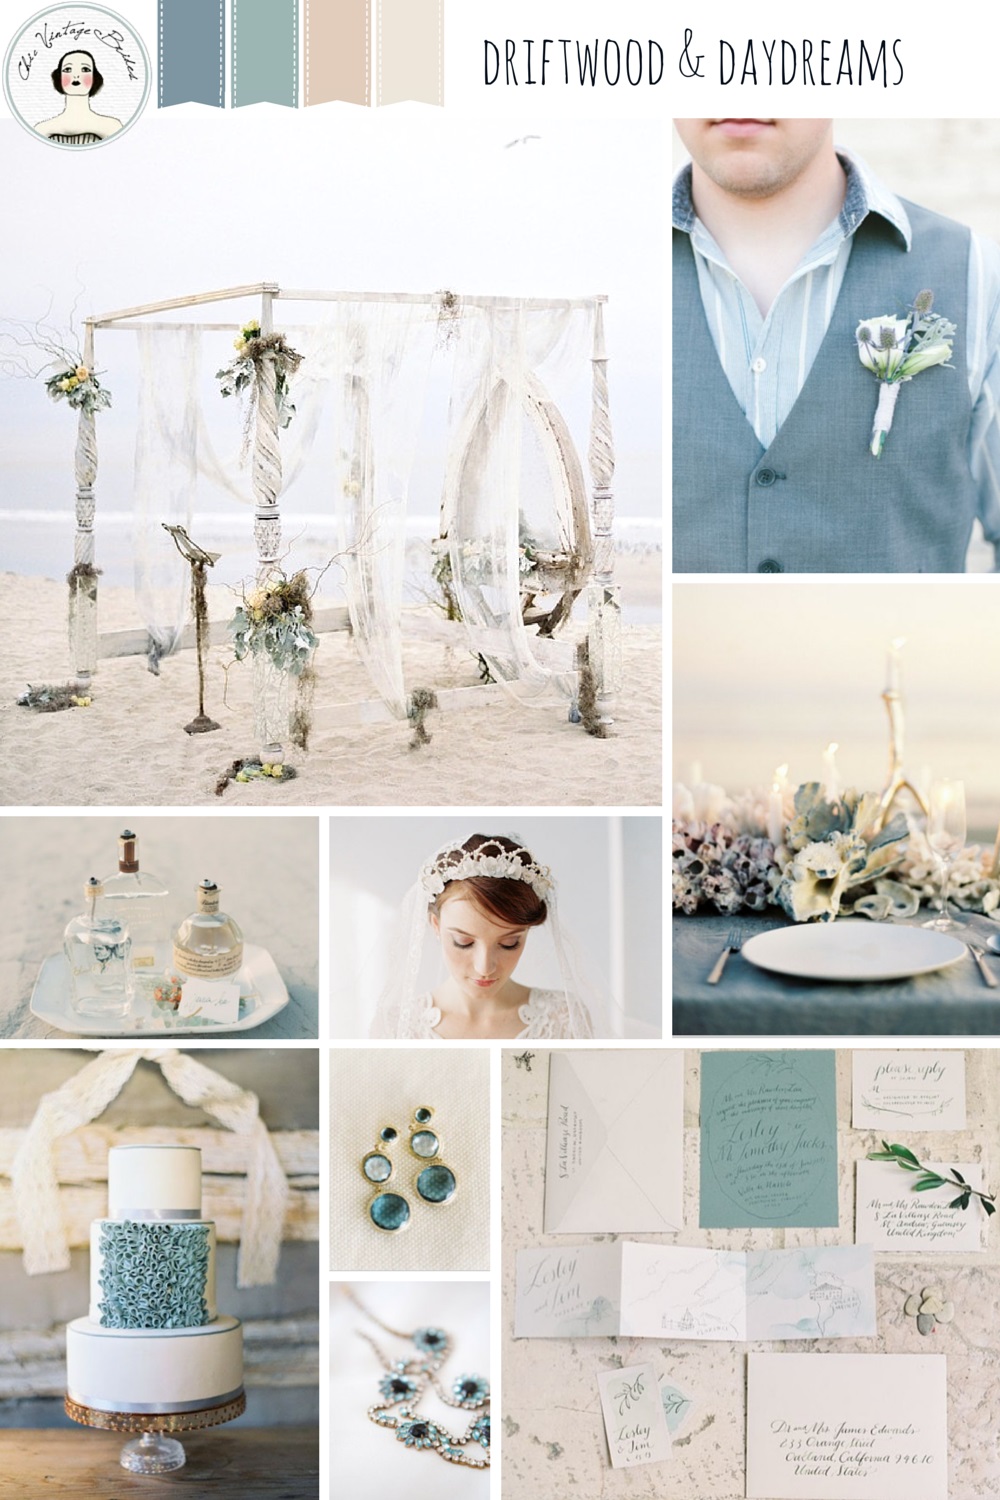 Driftwood & Daydreams - Beach Wedding Inspiration in Shades of Dusky Blues and Greens